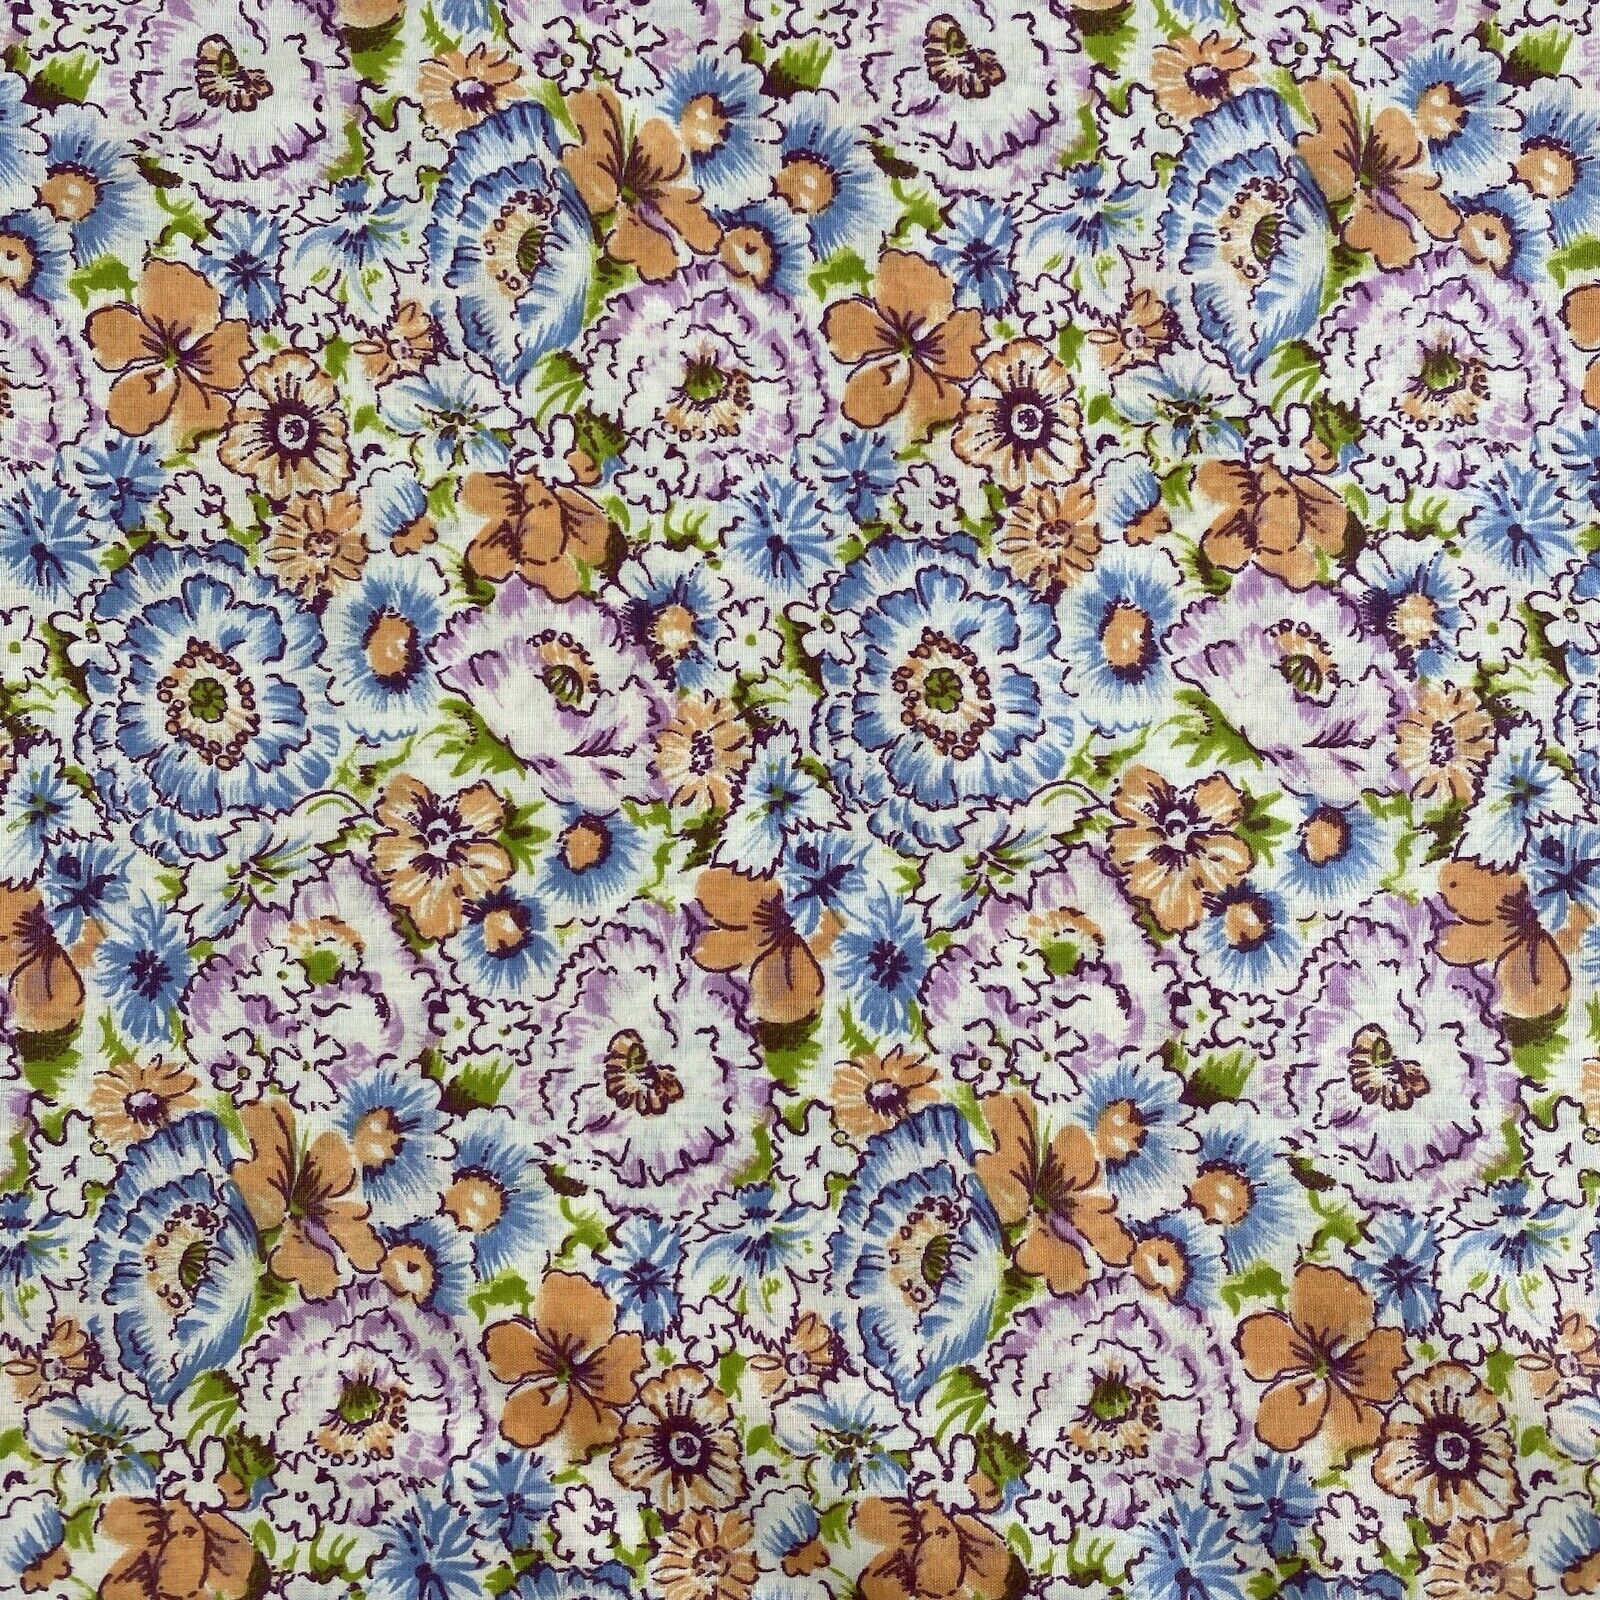 Vintage FABRIC FLORAL Muted Peach Blue Lavender Green Flower Power 44\